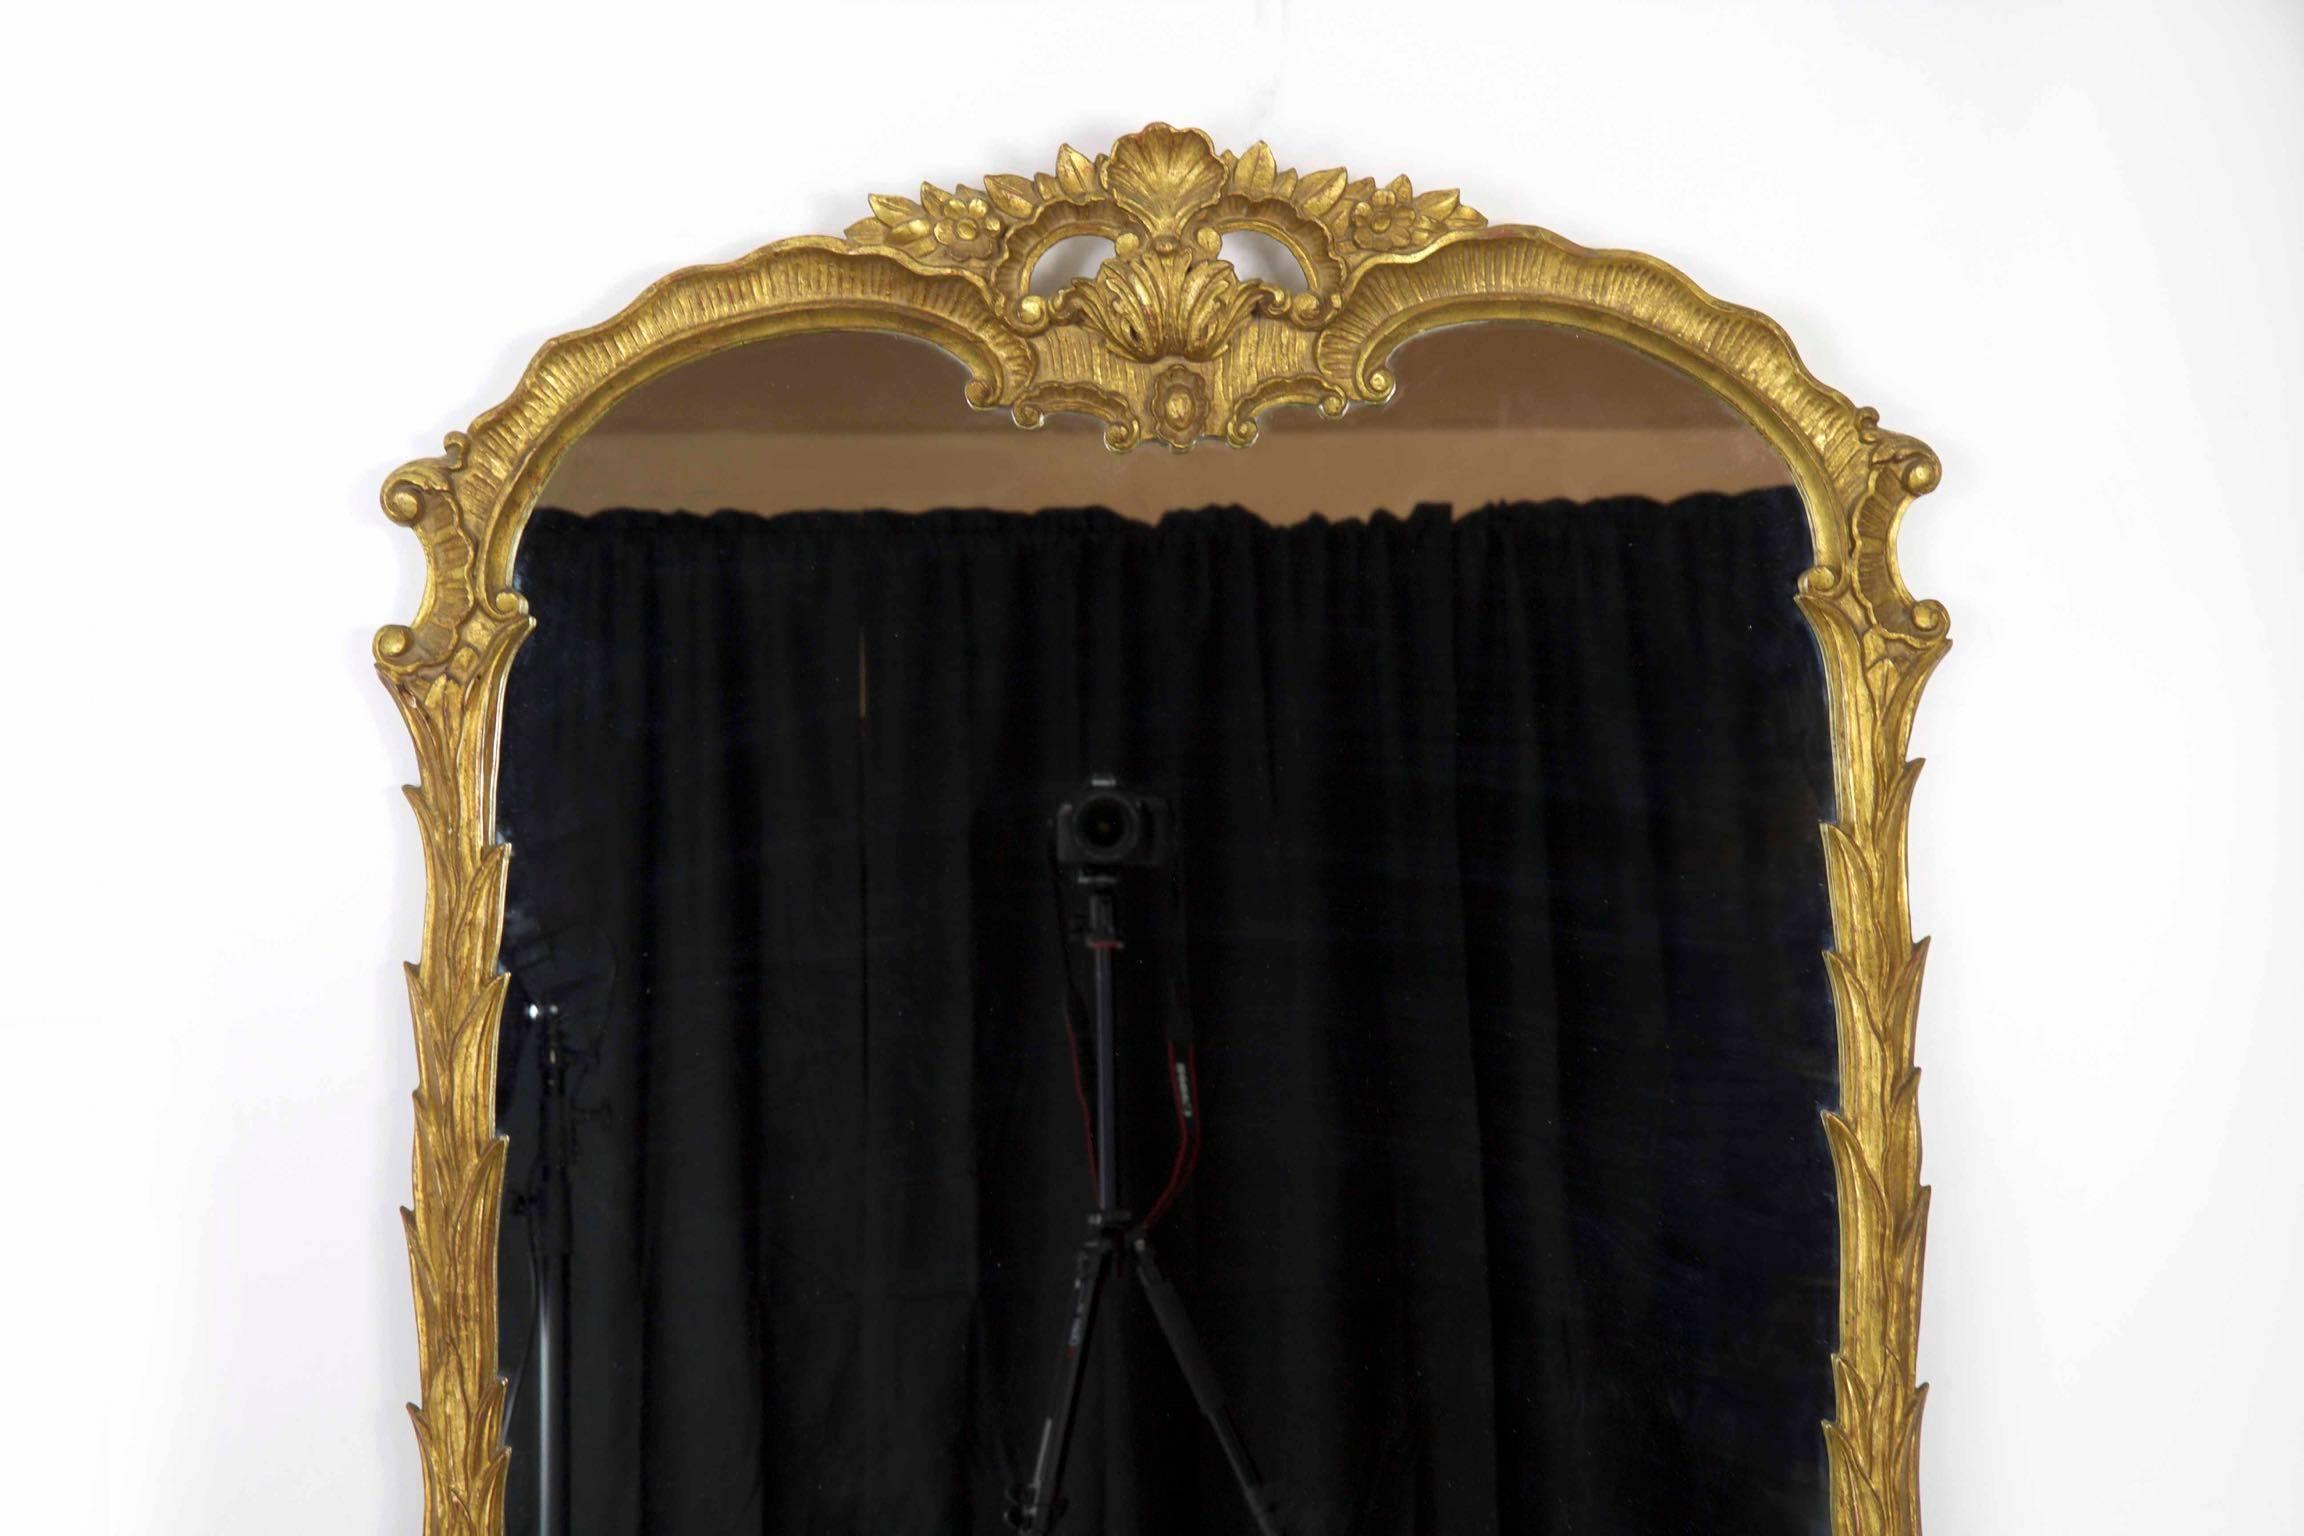 The refreshingly organic interpretation of the Rococo motif found in this finely crafted mirror is unusually striking. It has a degree of restraint where the undulating shape allows the chaotic display of waterleaves that furl and climb the frame to